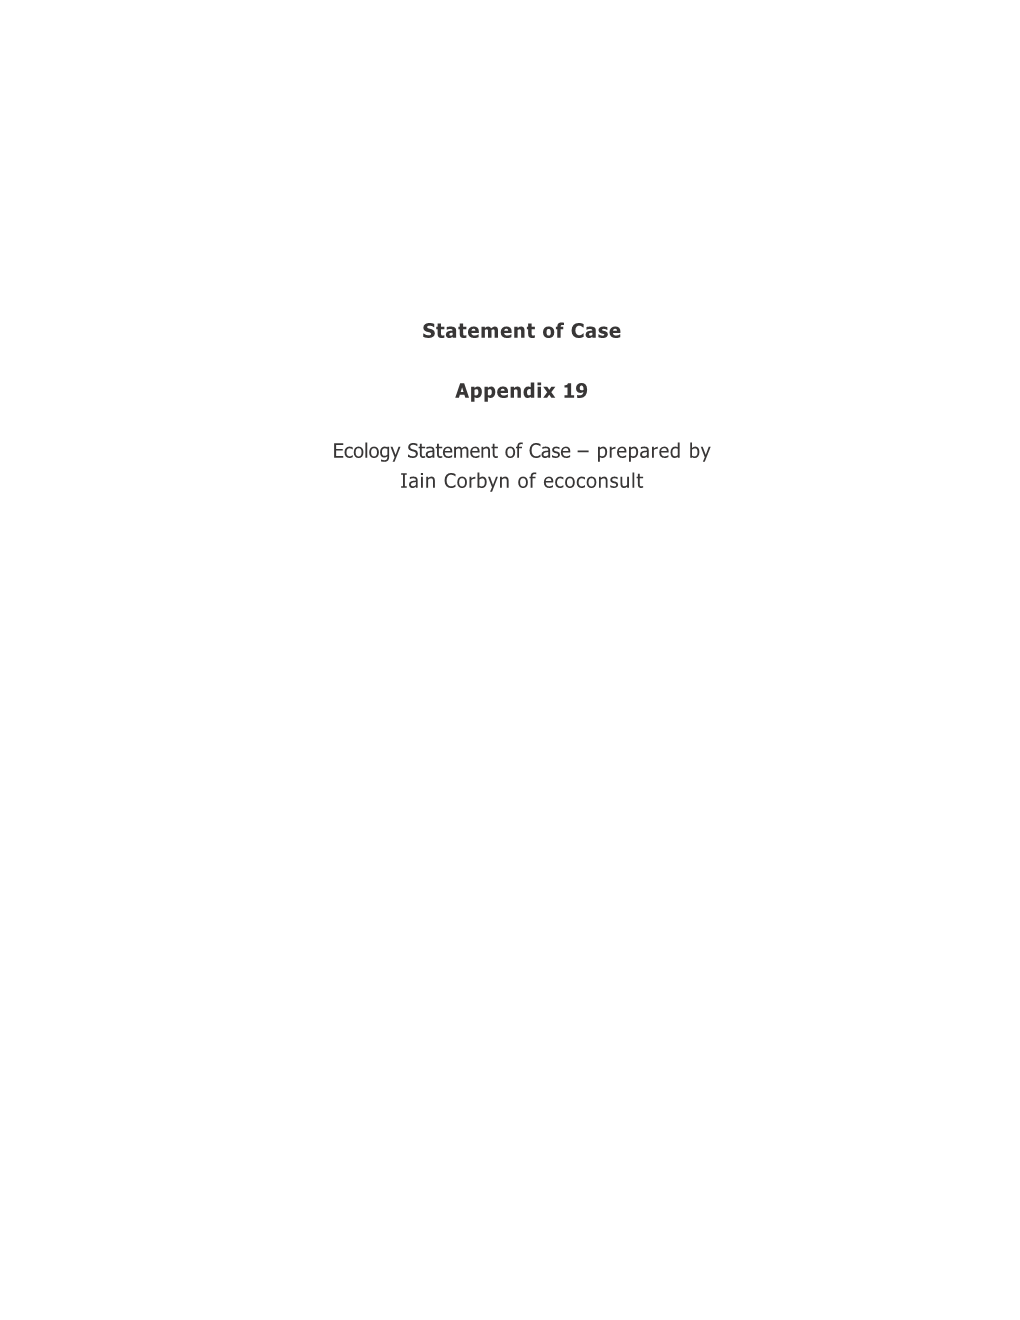 Statement of Case Appendix 19 Ecology Statement of Case – Prepared by Iain Corbyn of Ecoconsult